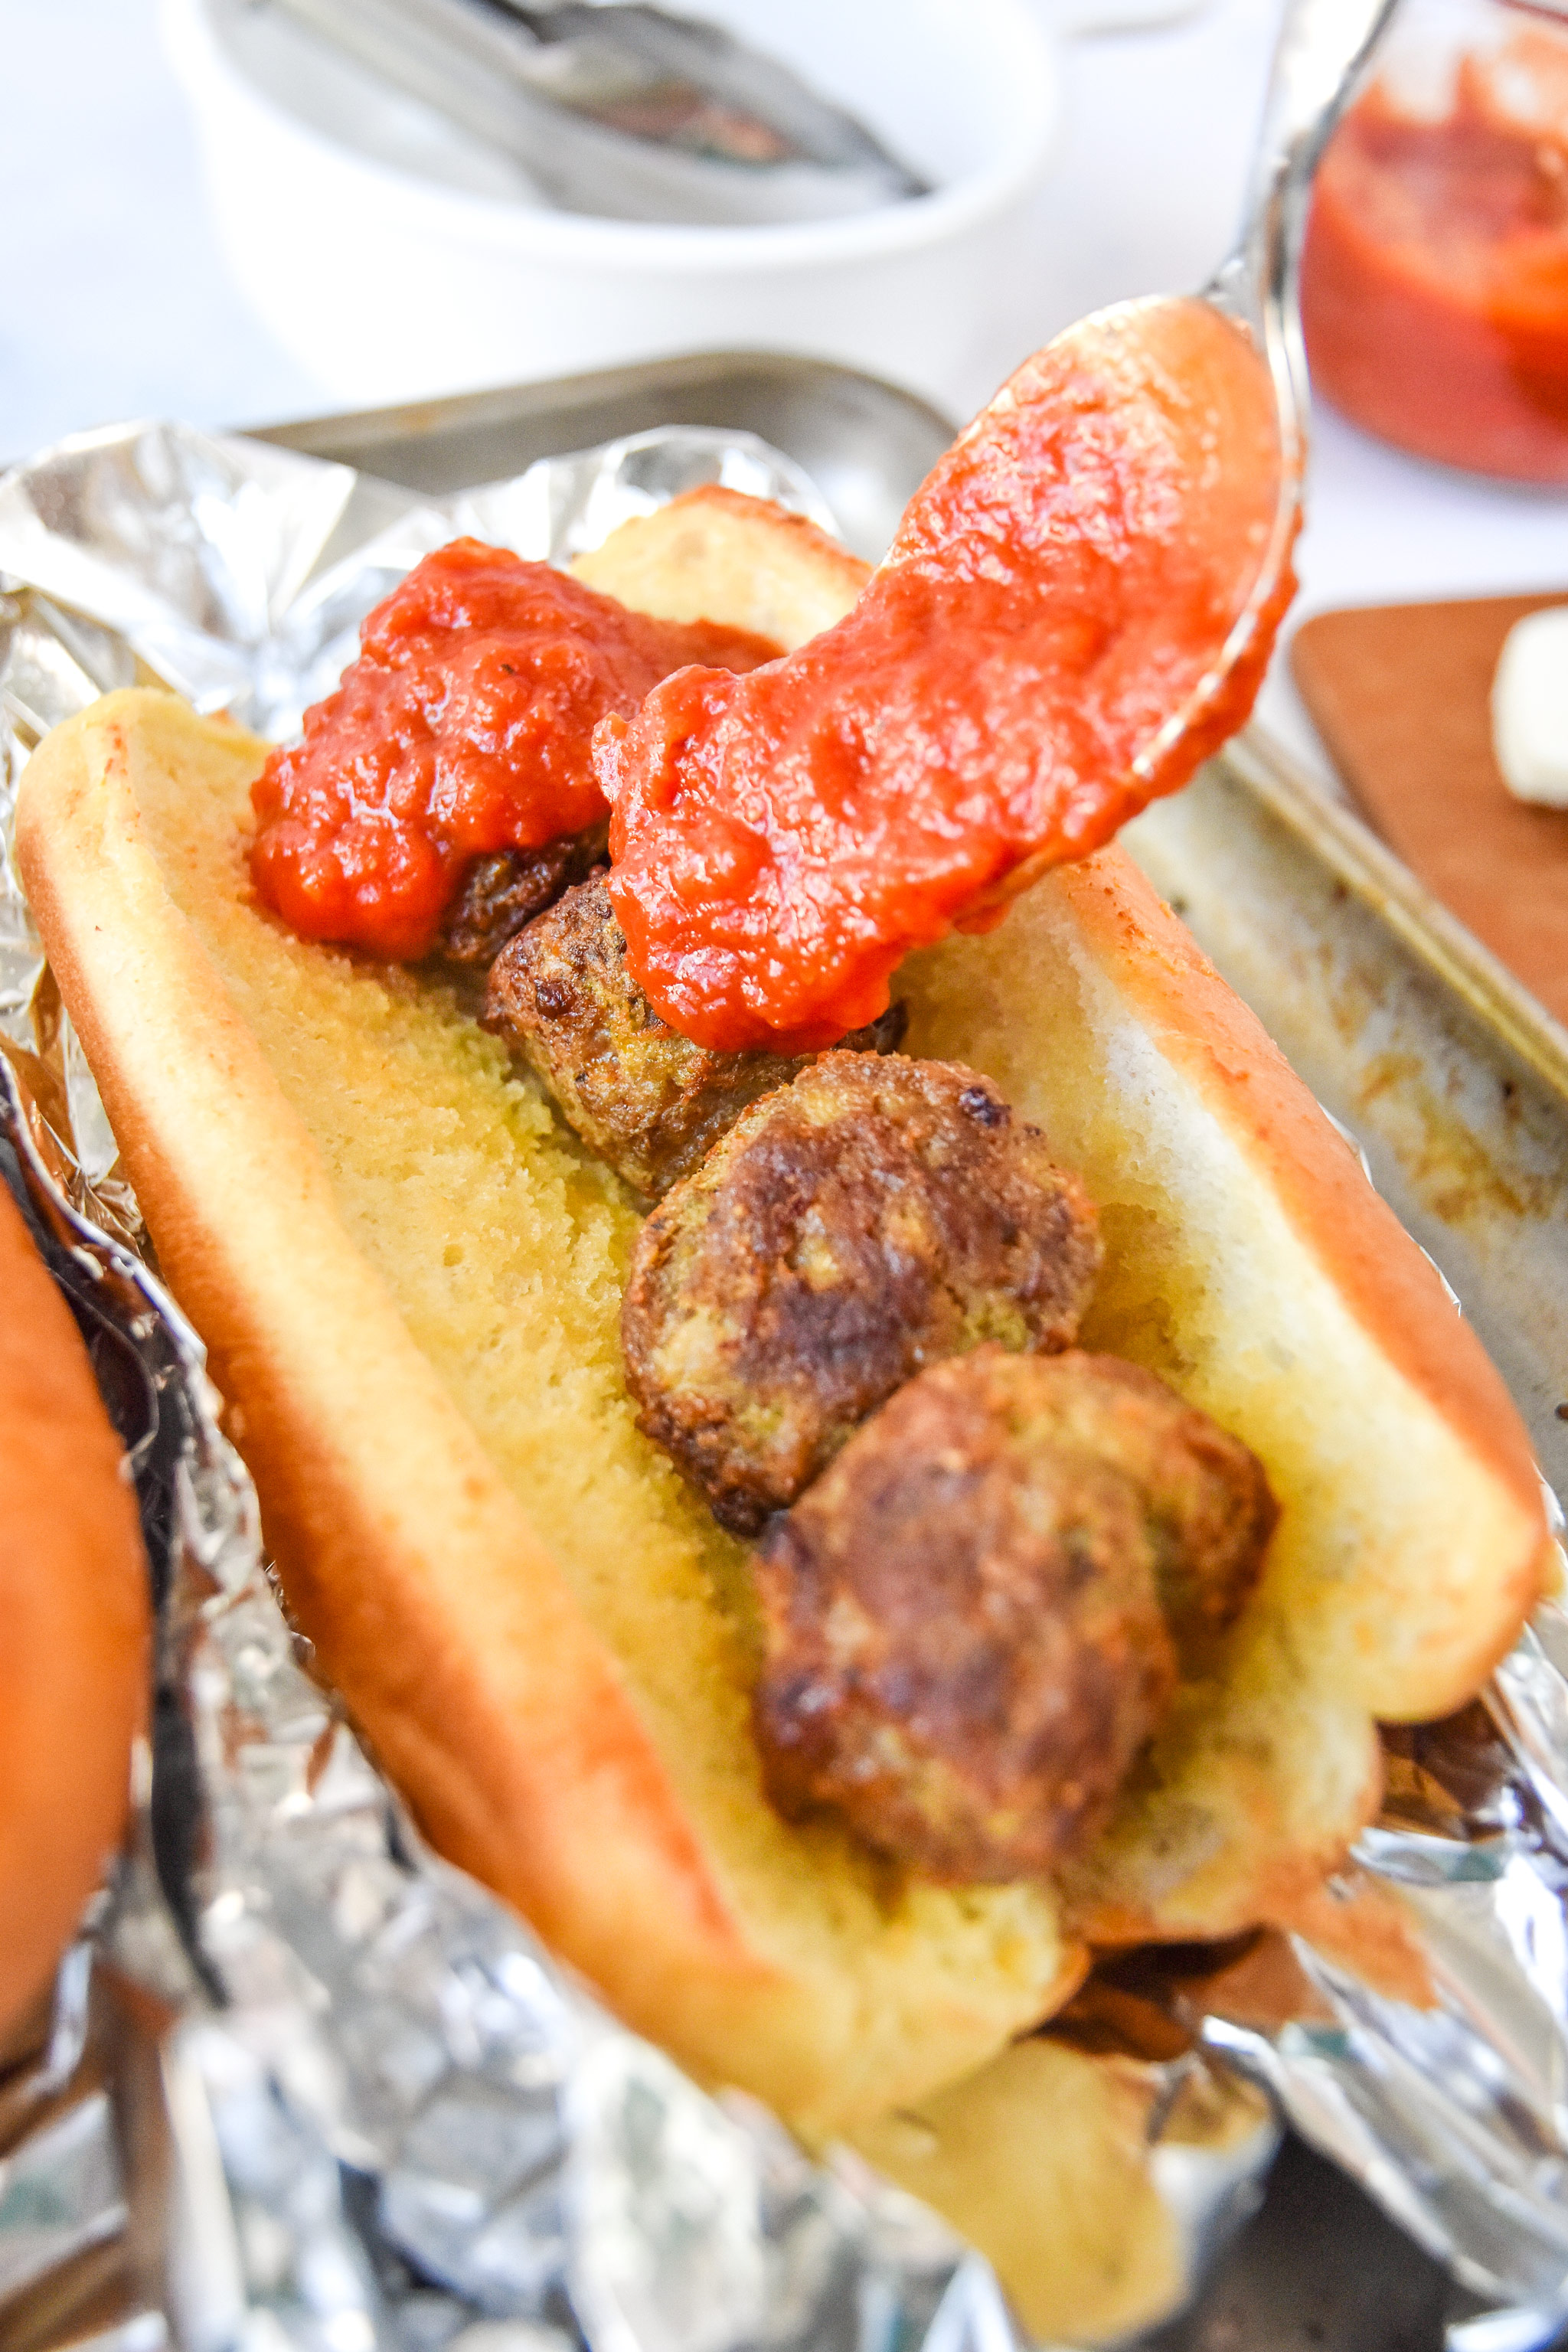 spooning sauce onto the meatballs in the sandwich.